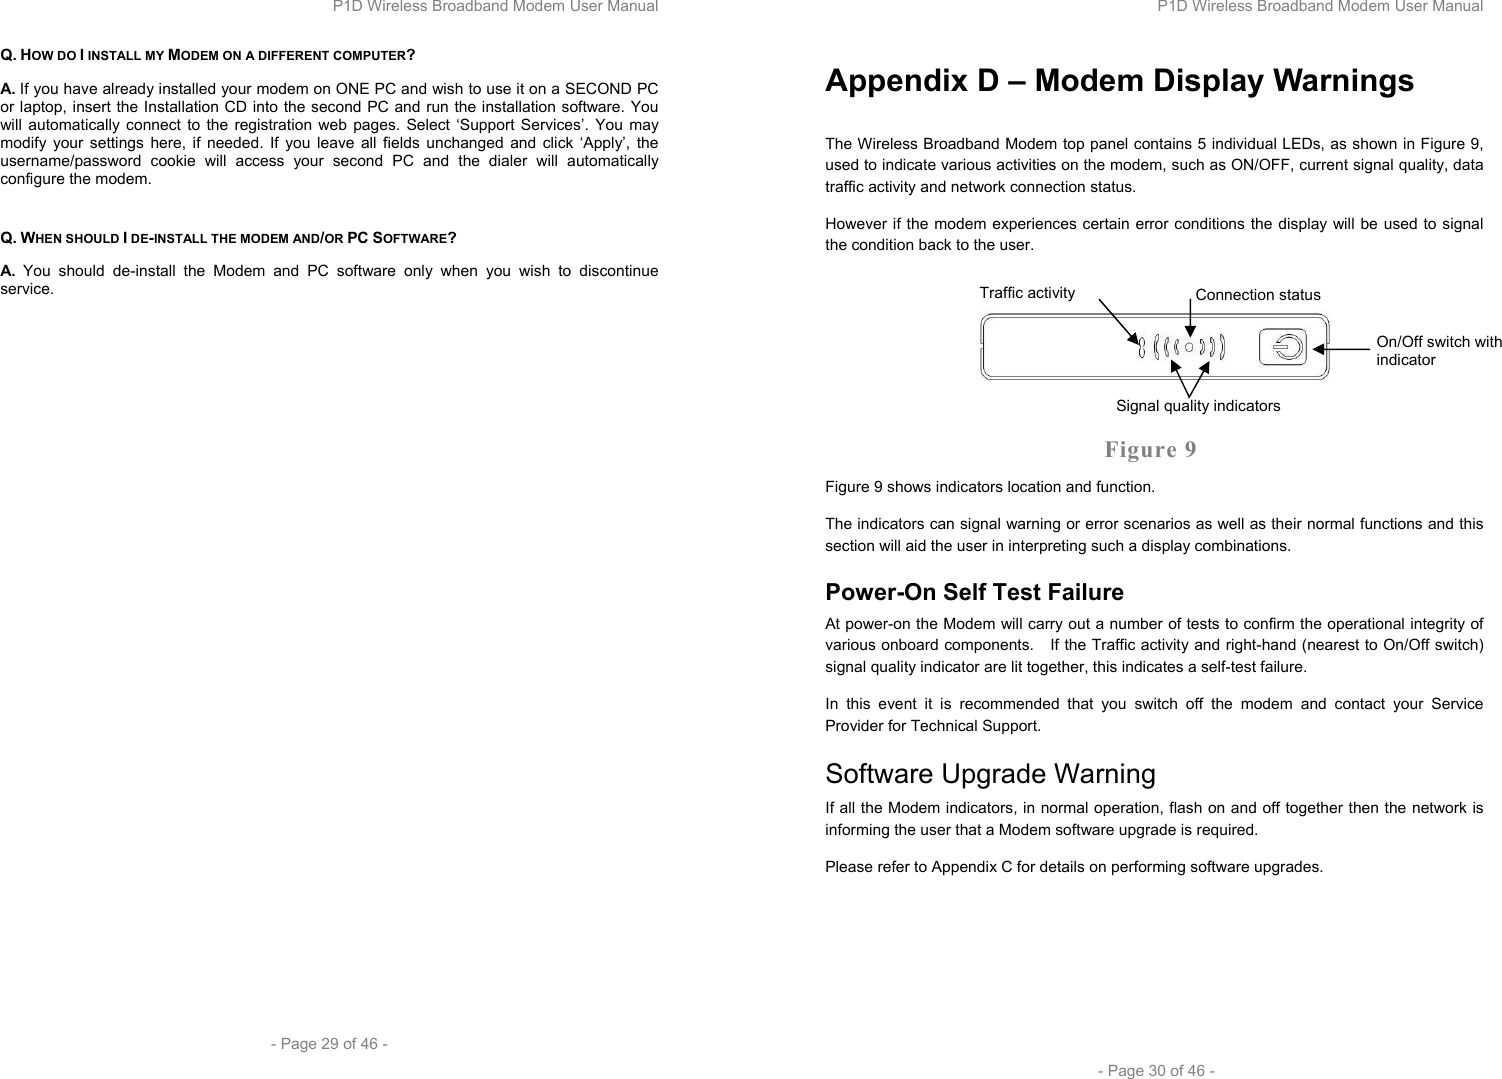 P1D Wireless Broadband Modem User Manual  - Page 29 of 46 -  Q. HOW DO I INSTALL MY MODEM ON A DIFFERENT COMPUTER? A. If you have already installed your modem on ONE PC and wish to use it on a SECOND PC or laptop, insert the Installation CD into the second PC and run the installation software. You will automatically connect to the registration web pages. Select ‘Support Services’. You may modify your settings here, if needed. If you leave all fields unchanged and click ‘Apply’, the username/password cookie will access your second PC and the dialer will automatically configure the modem.  Q. WHEN SHOULD I DE-INSTALL THE MODEM AND/OR PC SOFTWARE? A. You should de-install the Modem and PC software only when you wish to discontinue service. P1D Wireless Broadband Modem User Manual  - Page 30 of 46 - Appendix D – Modem Display Warnings  The Wireless Broadband Modem top panel contains 5 individual LEDs, as shown in Figure 9, used to indicate various activities on the modem, such as ON/OFF, current signal quality, data traffic activity and network connection status. However if the modem experiences certain error conditions the display will be used to signal the condition back to the user.    Figure 9 Figure 9 shows indicators location and function. The indicators can signal warning or error scenarios as well as their normal functions and this section will aid the user in interpreting such a display combinations. Power-On Self Test Failure At power-on the Modem will carry out a number of tests to confirm the operational integrity of various onboard components.   If the Traffic activity and right-hand (nearest to On/Off switch) signal quality indicator are lit together, this indicates a self-test failure. In this event it is recommended that you switch off the modem and contact your Service Provider for Technical Support. Software Upgrade Warning If all the Modem indicators, in normal operation, flash on and off together then the network is informing the user that a Modem software upgrade is required. Please refer to Appendix C for details on performing software upgrades.  On/Off switch with indicator Connection status Signal quality indicators Traffic activity 